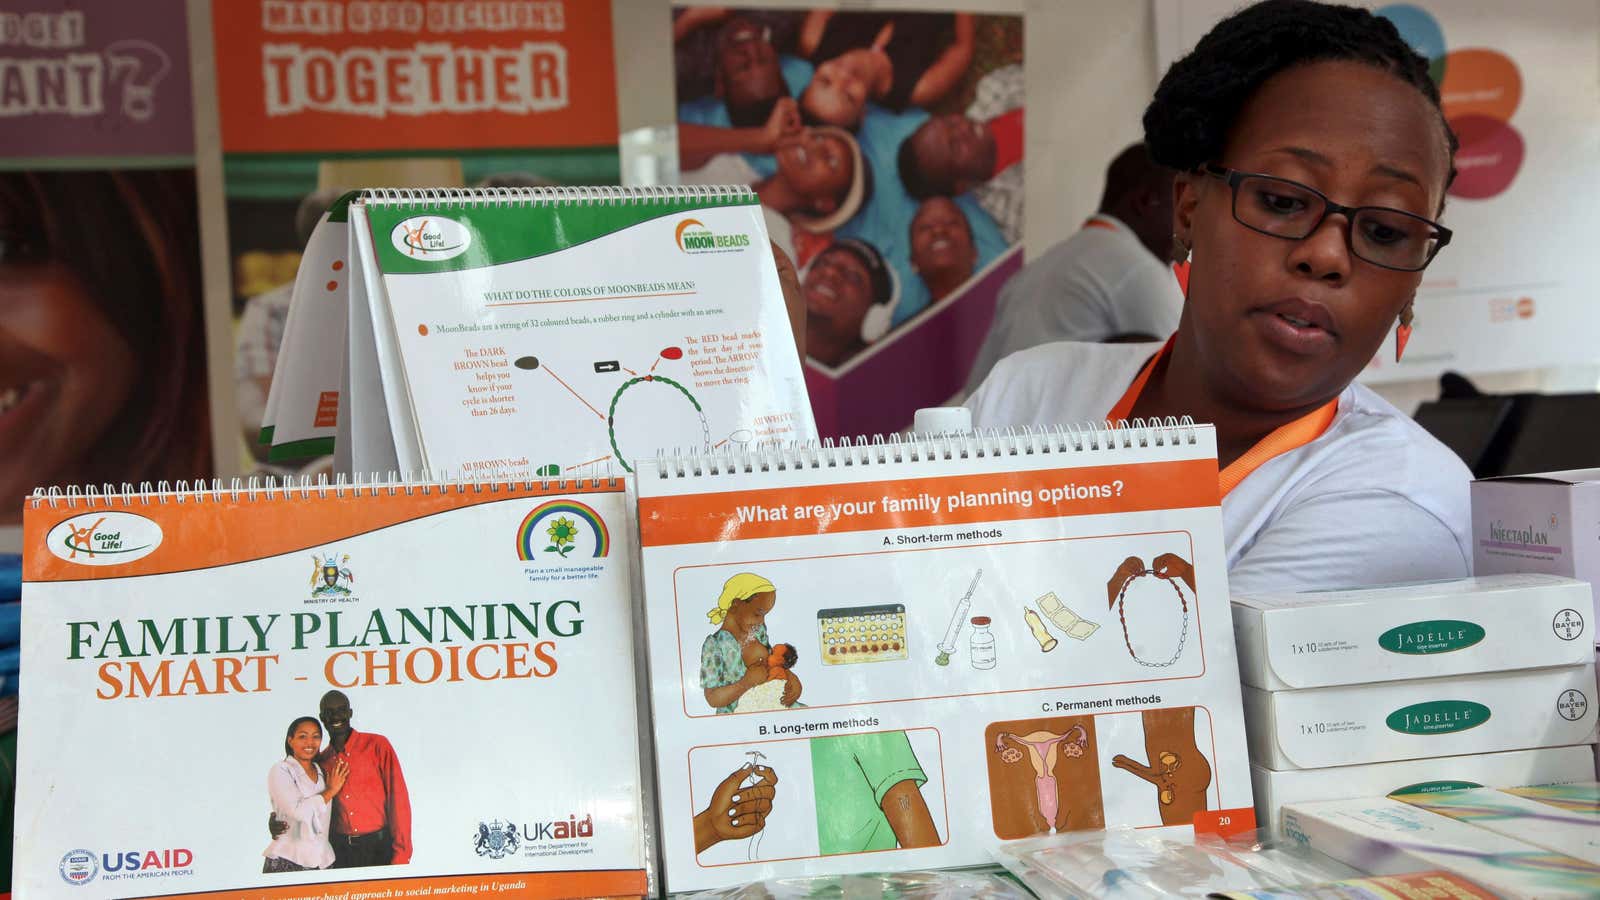 Family planning services are being cut around the world because of the global gag rule.